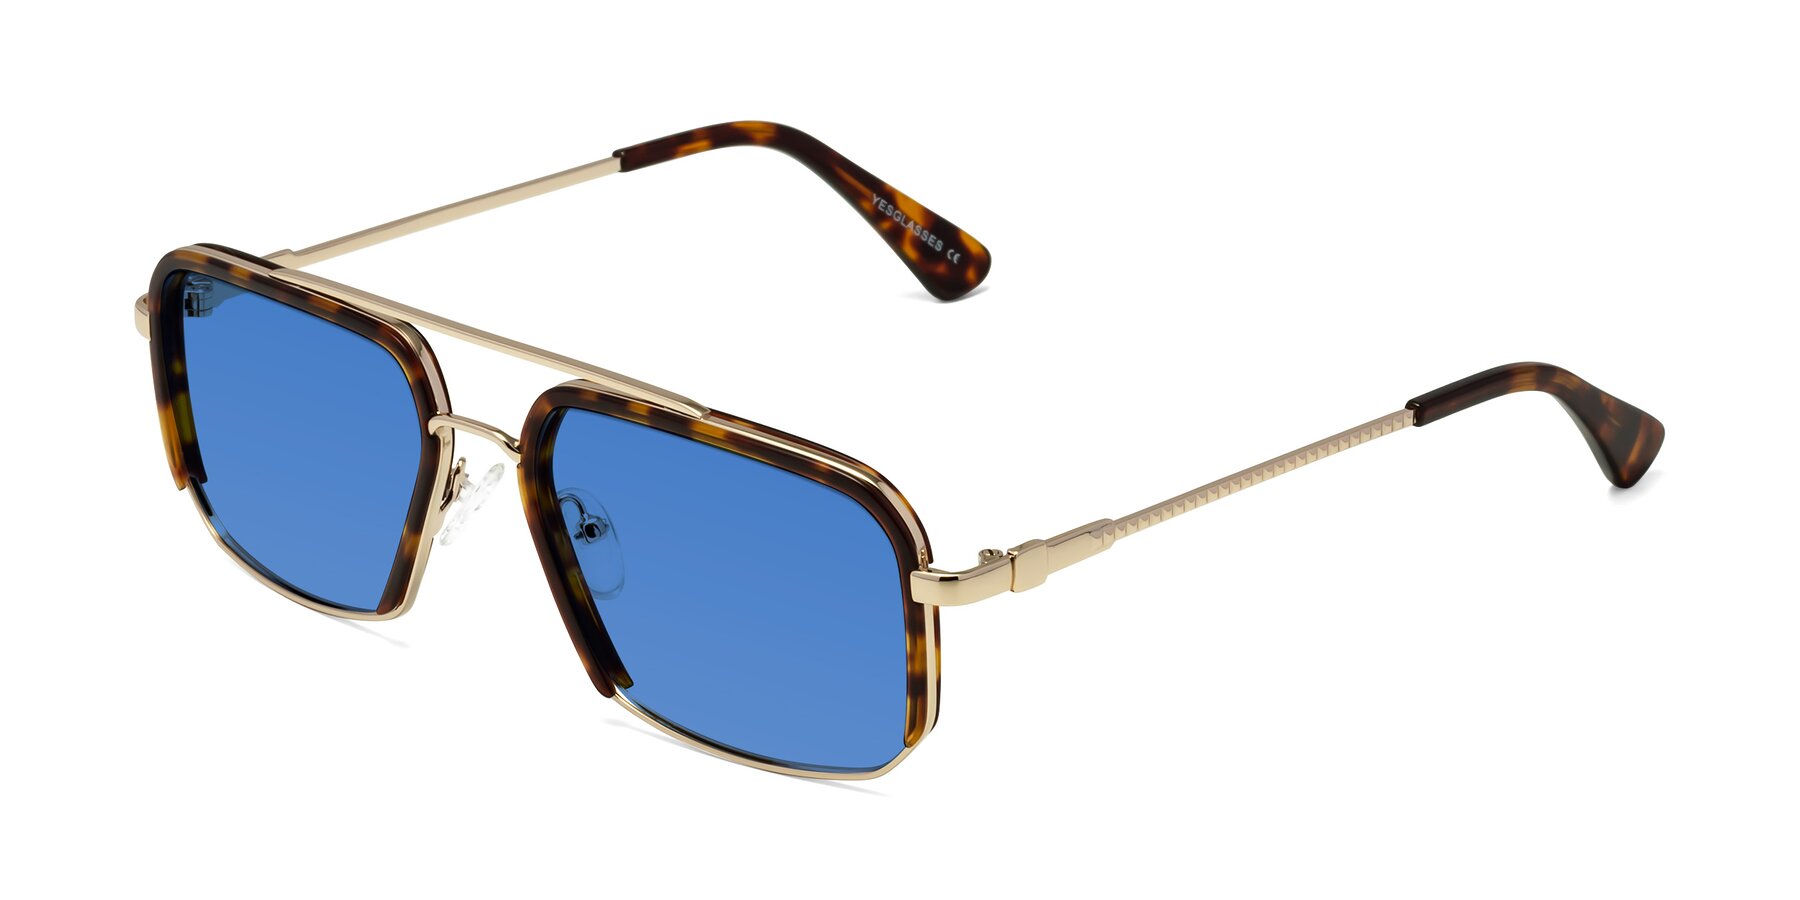 Angle of Dechter in Tortoise-Gold with Blue Tinted Lenses